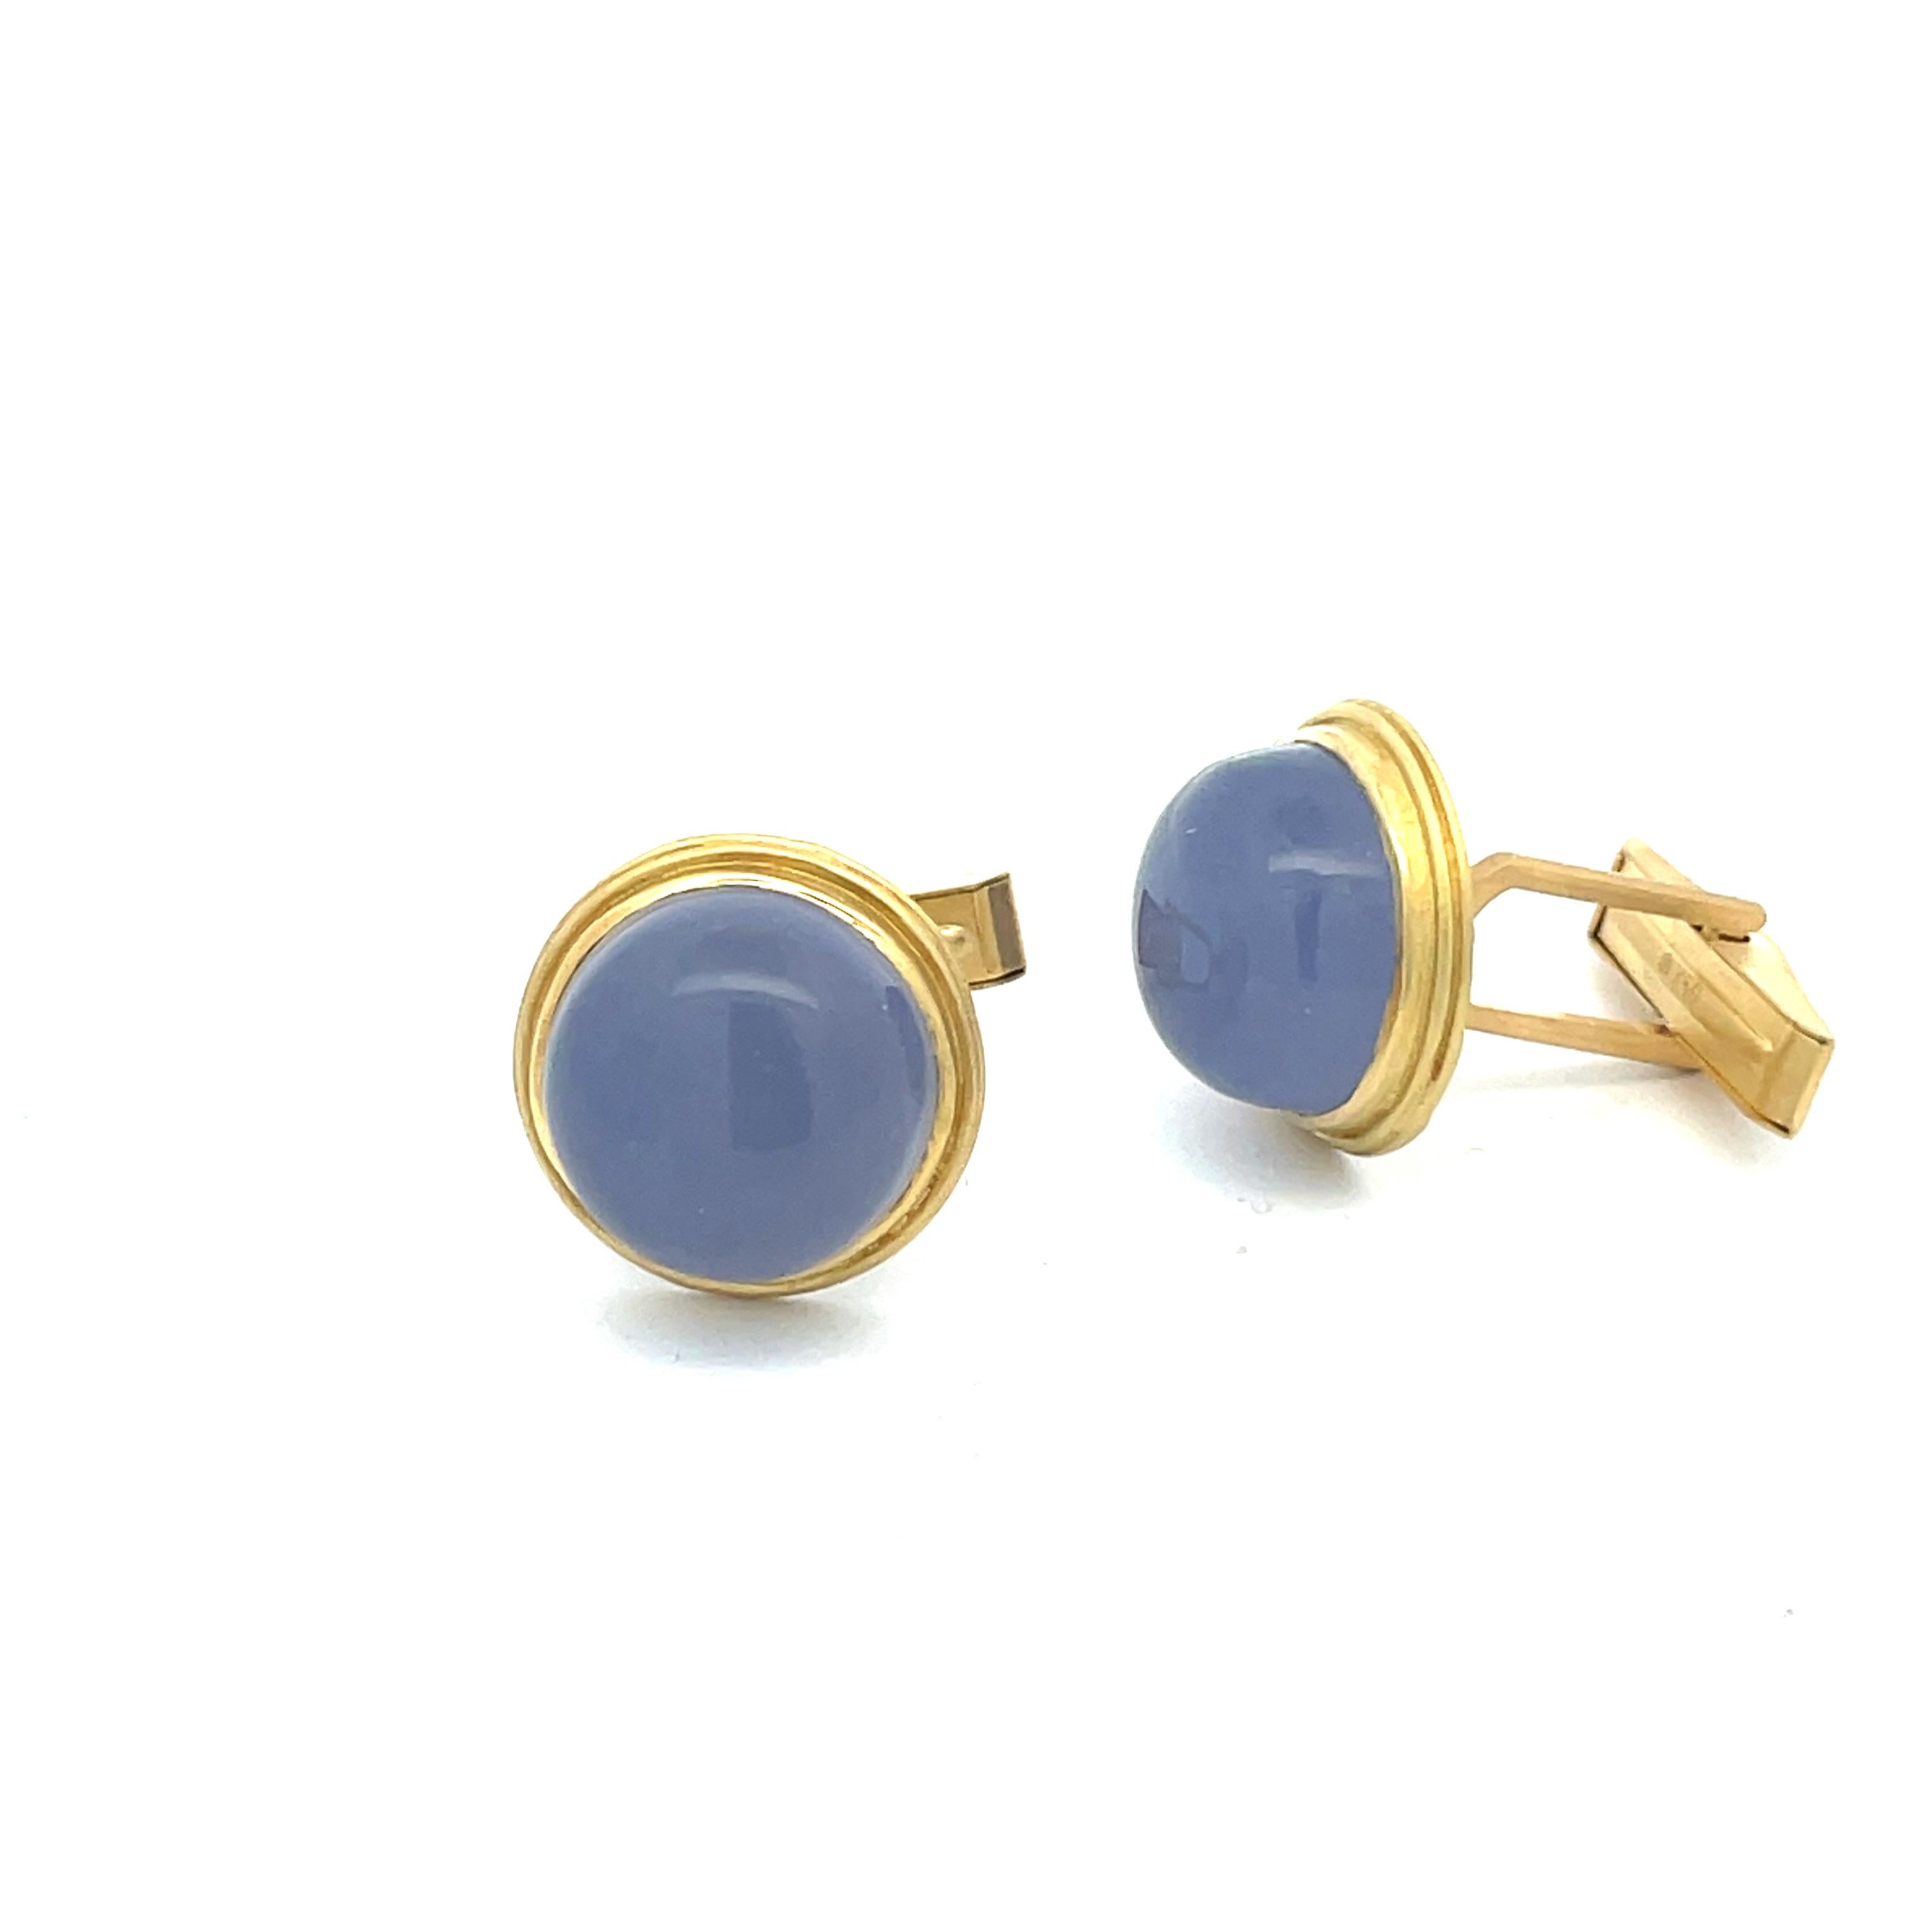 18K and blue chalcedony cabochon cufflinks, circa 2000’s, by goldsmith Rob Greene. The luminous blue gems are meticulously set in a double bezel, polished and matte. Measure 3/4″ (18mm) in diameter, in excellent condition